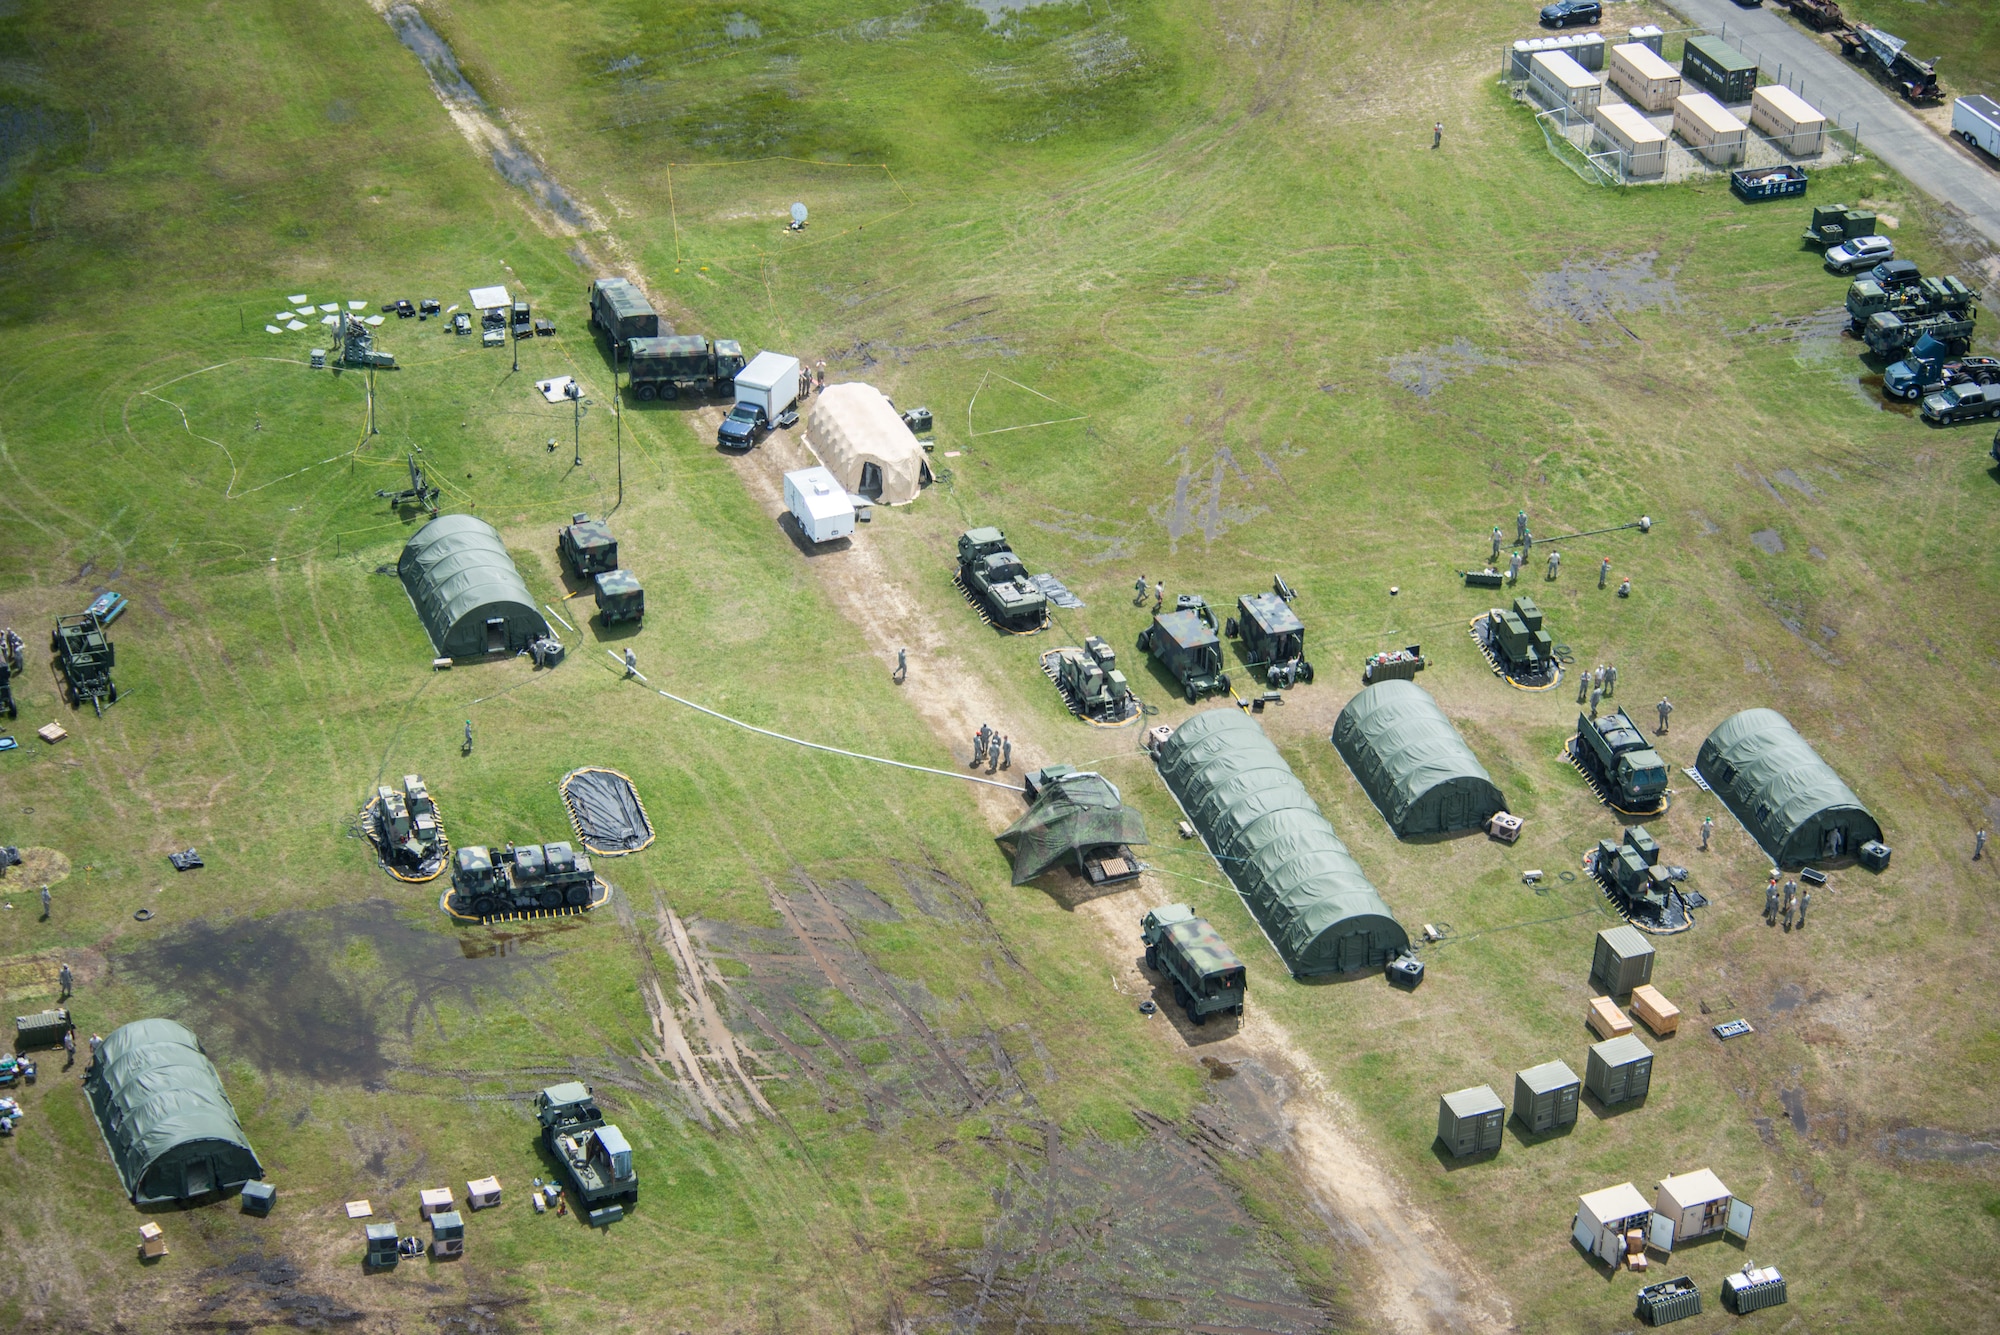 An aerial view of a training site, constructed by members of the 103rd Air Control Squadron (ACS) in Sea Girt, N.J., June 2018. Members of the 103rd ACS constructed the site during an annual training exercise. (Air National Guard photo by Tech. Sgt. Tamara R. Dabney)